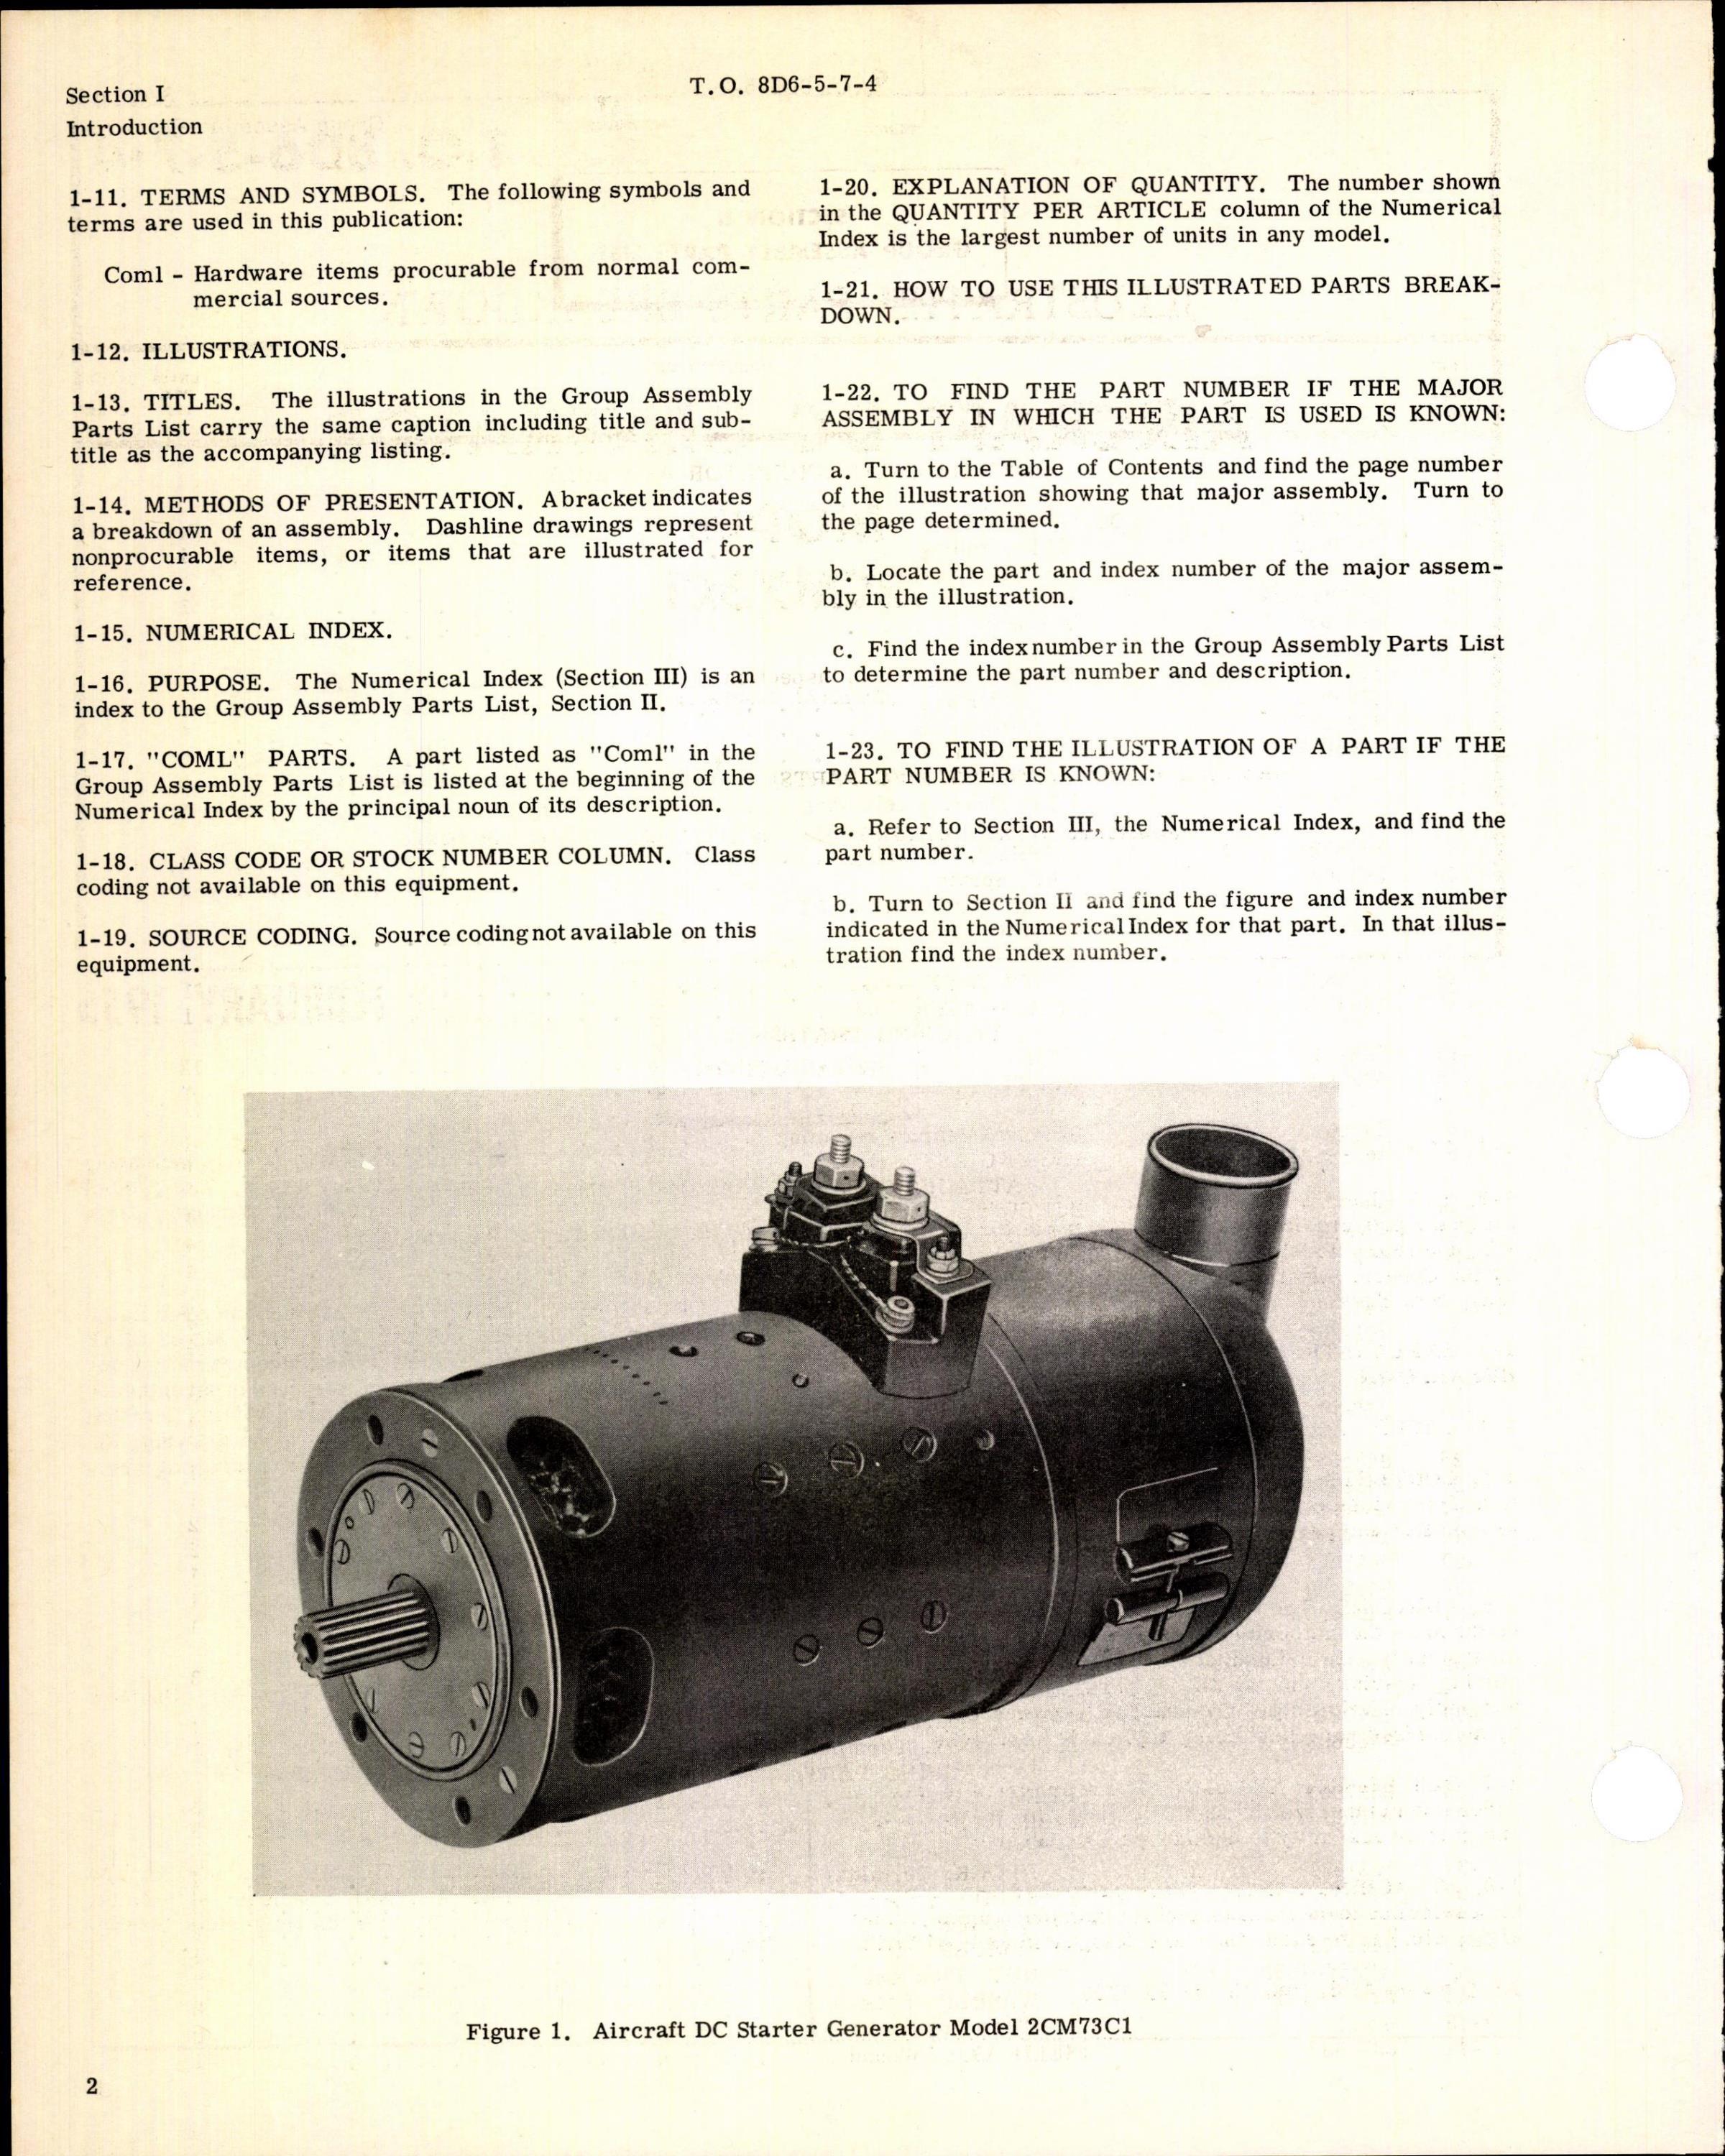 Sample page 2 from AirCorps Library document: Parts Breakdown for Aircraft Generator Model